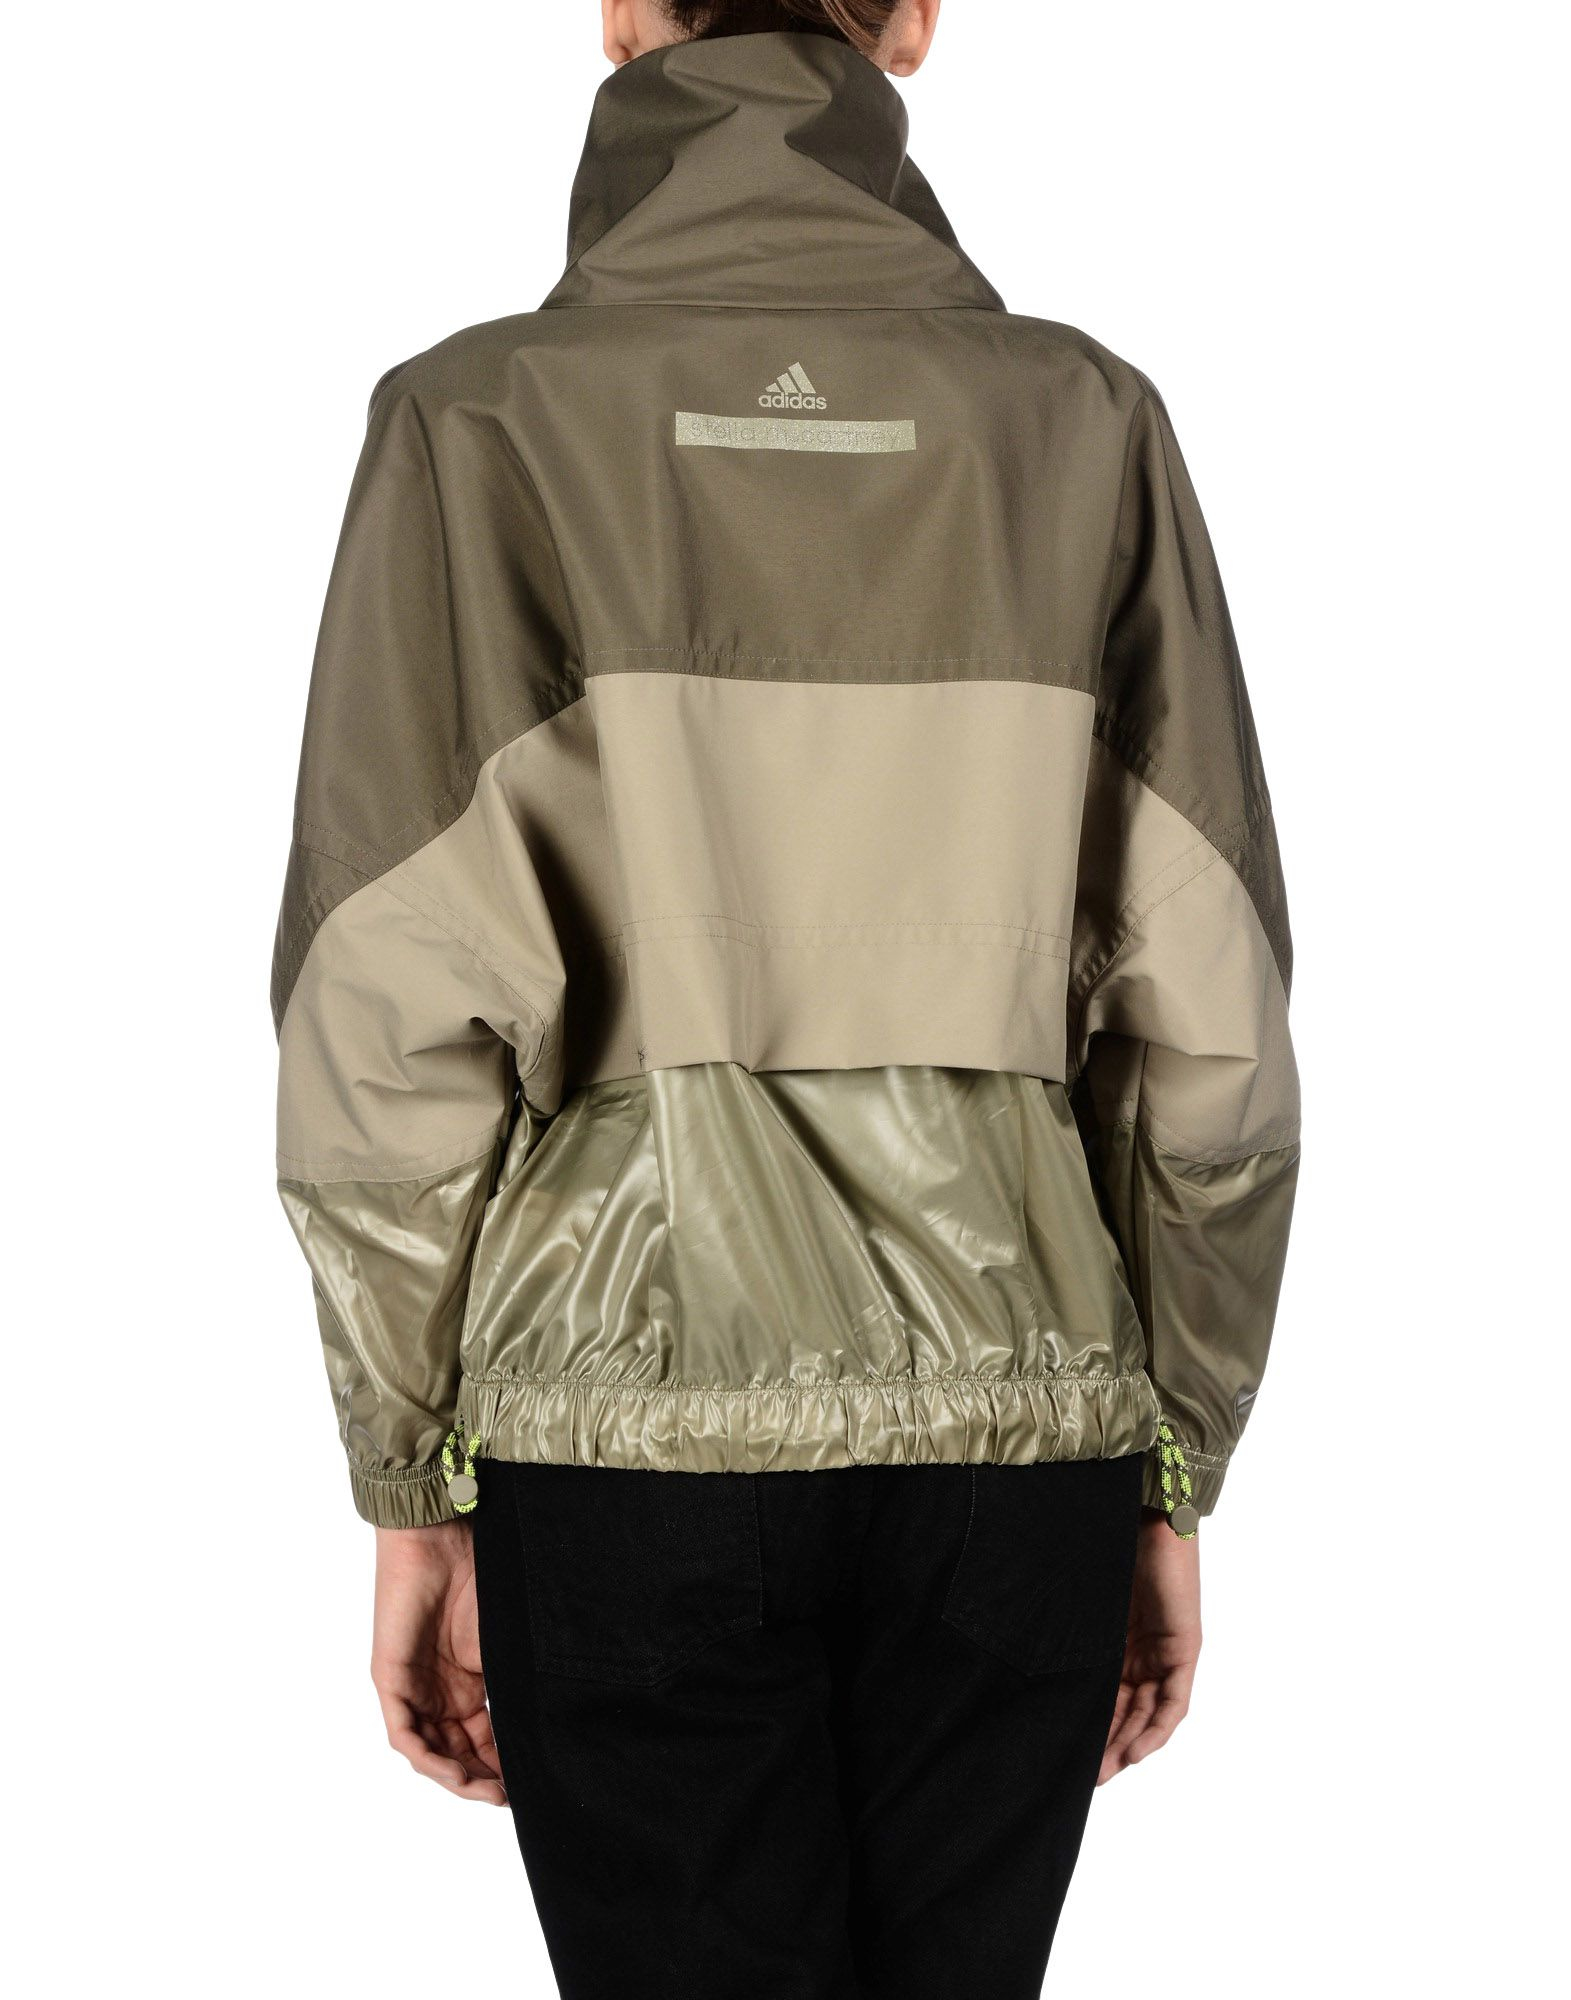 adidas By Stella McCartney Synthetic Jacket in Khaki (Natural) - Lyst